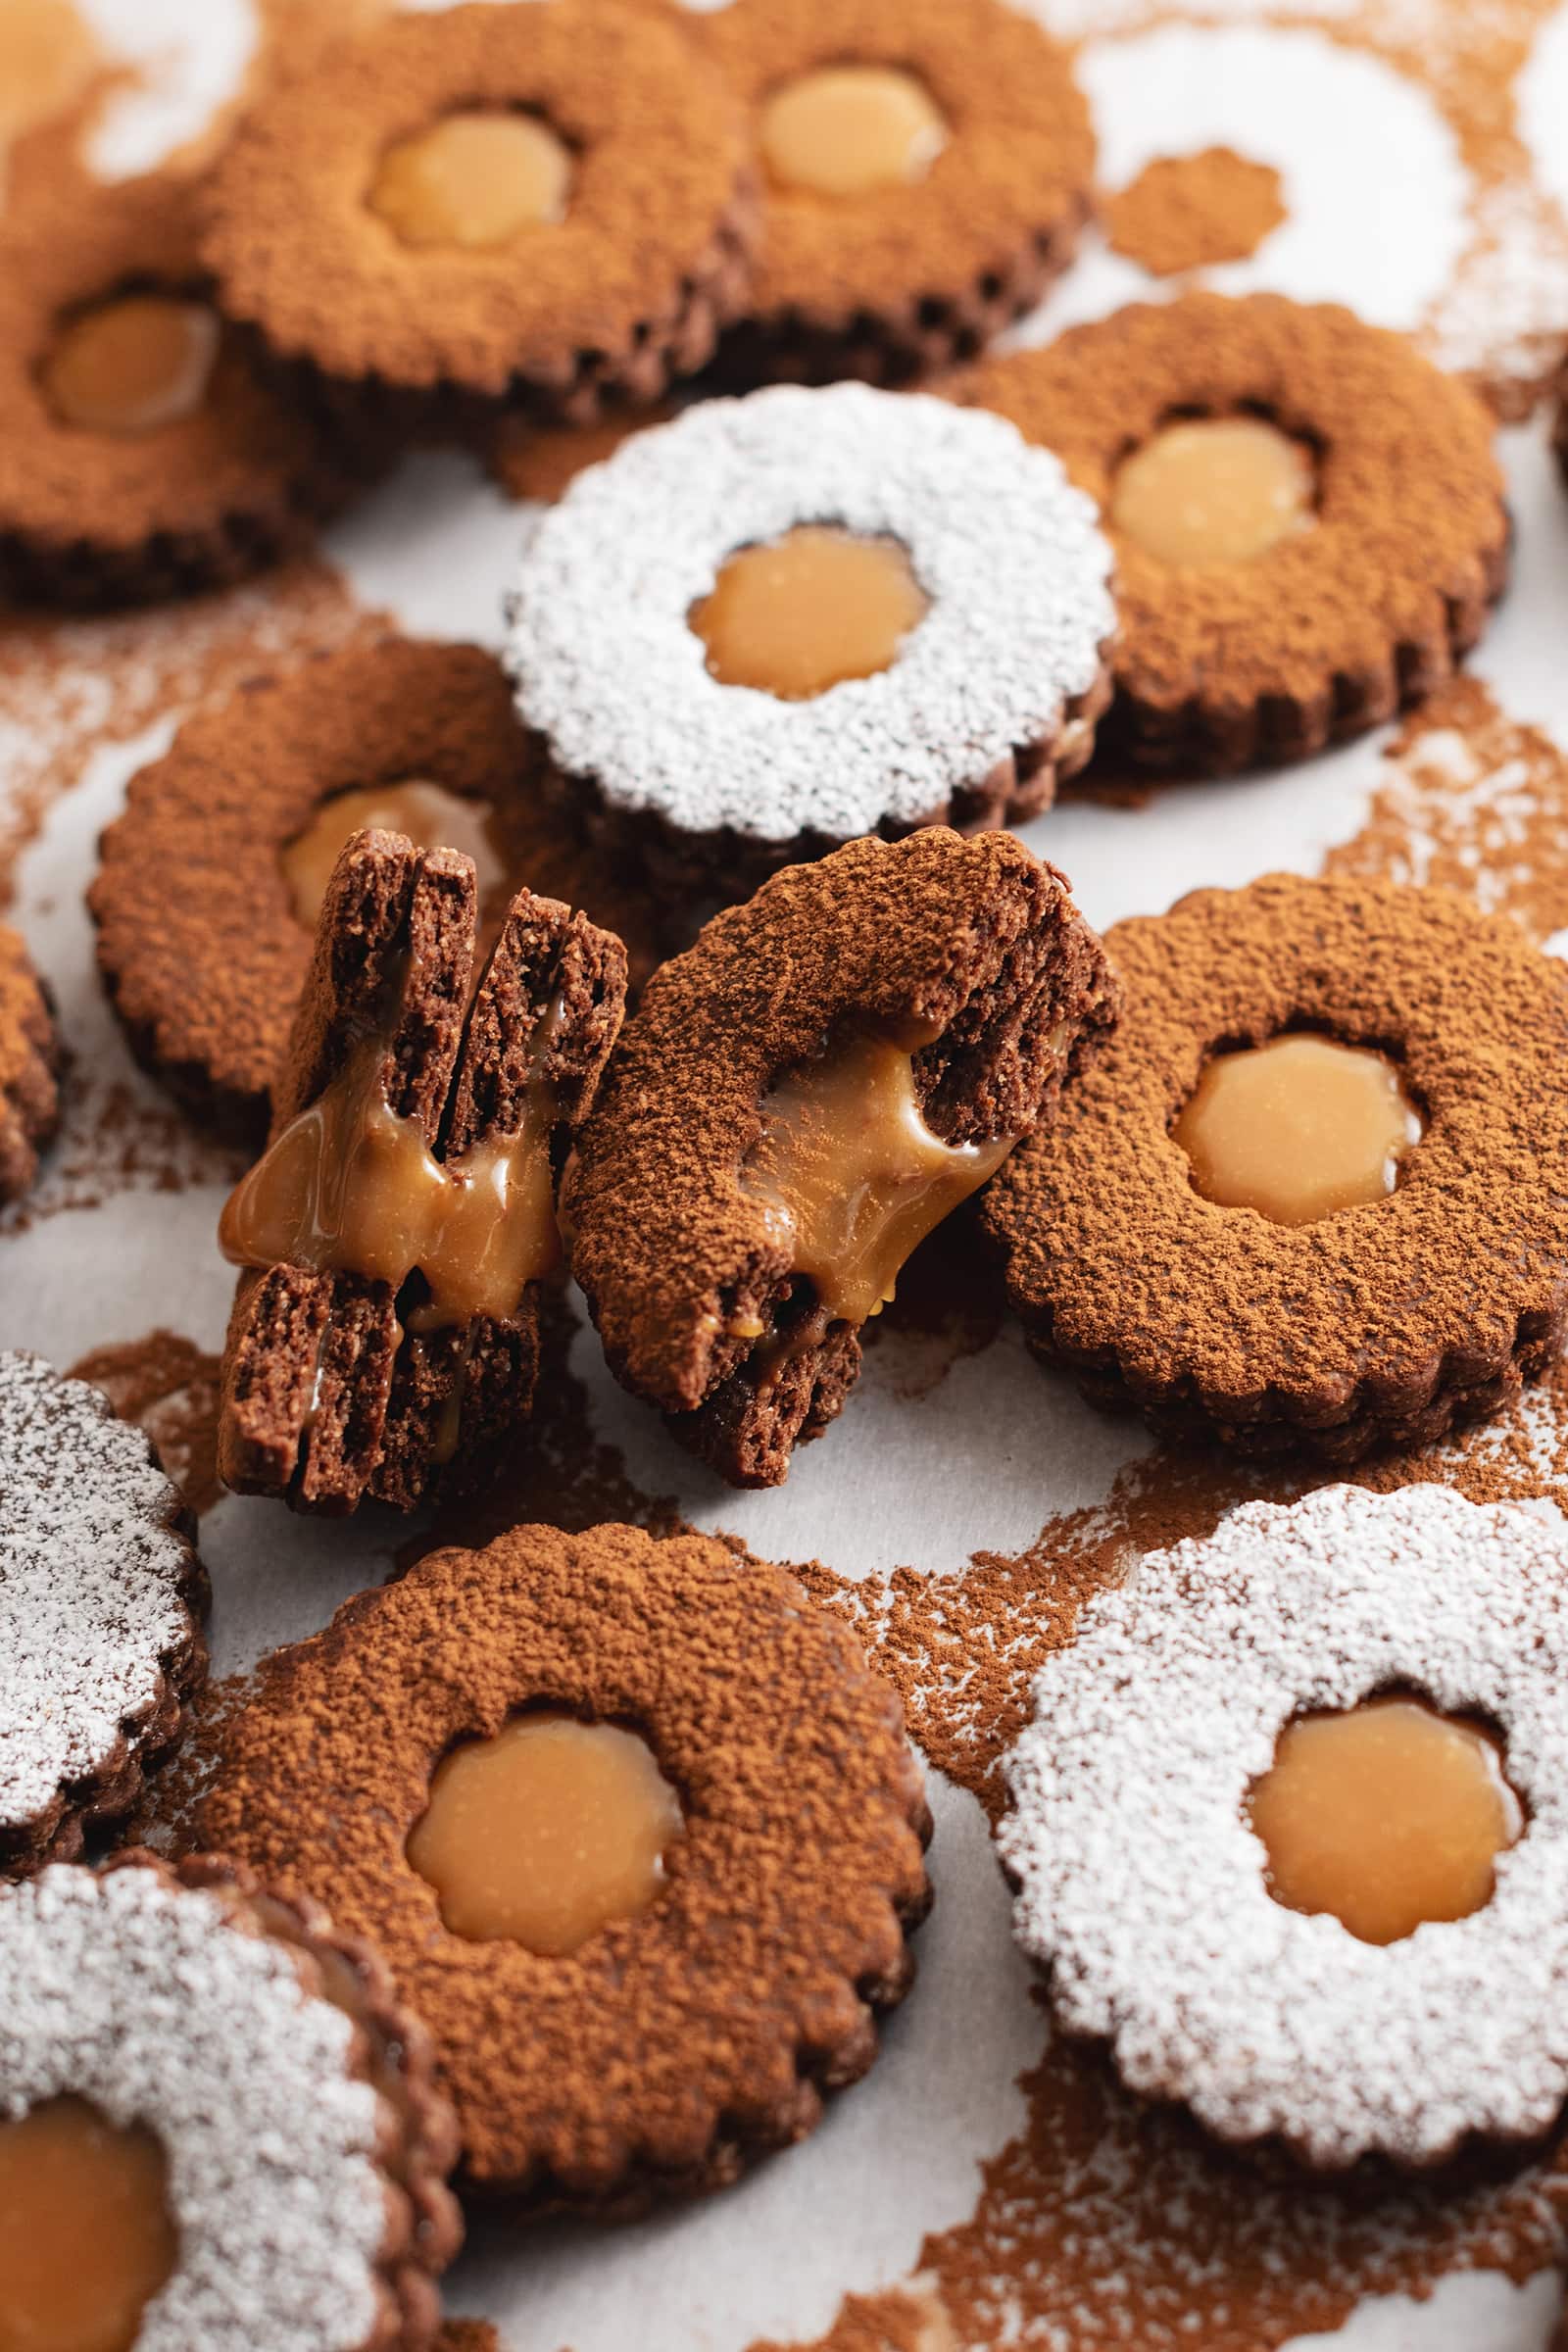 Two salted caramel chocolate linzer cookies split in half to show the gooey caramel filling inside.